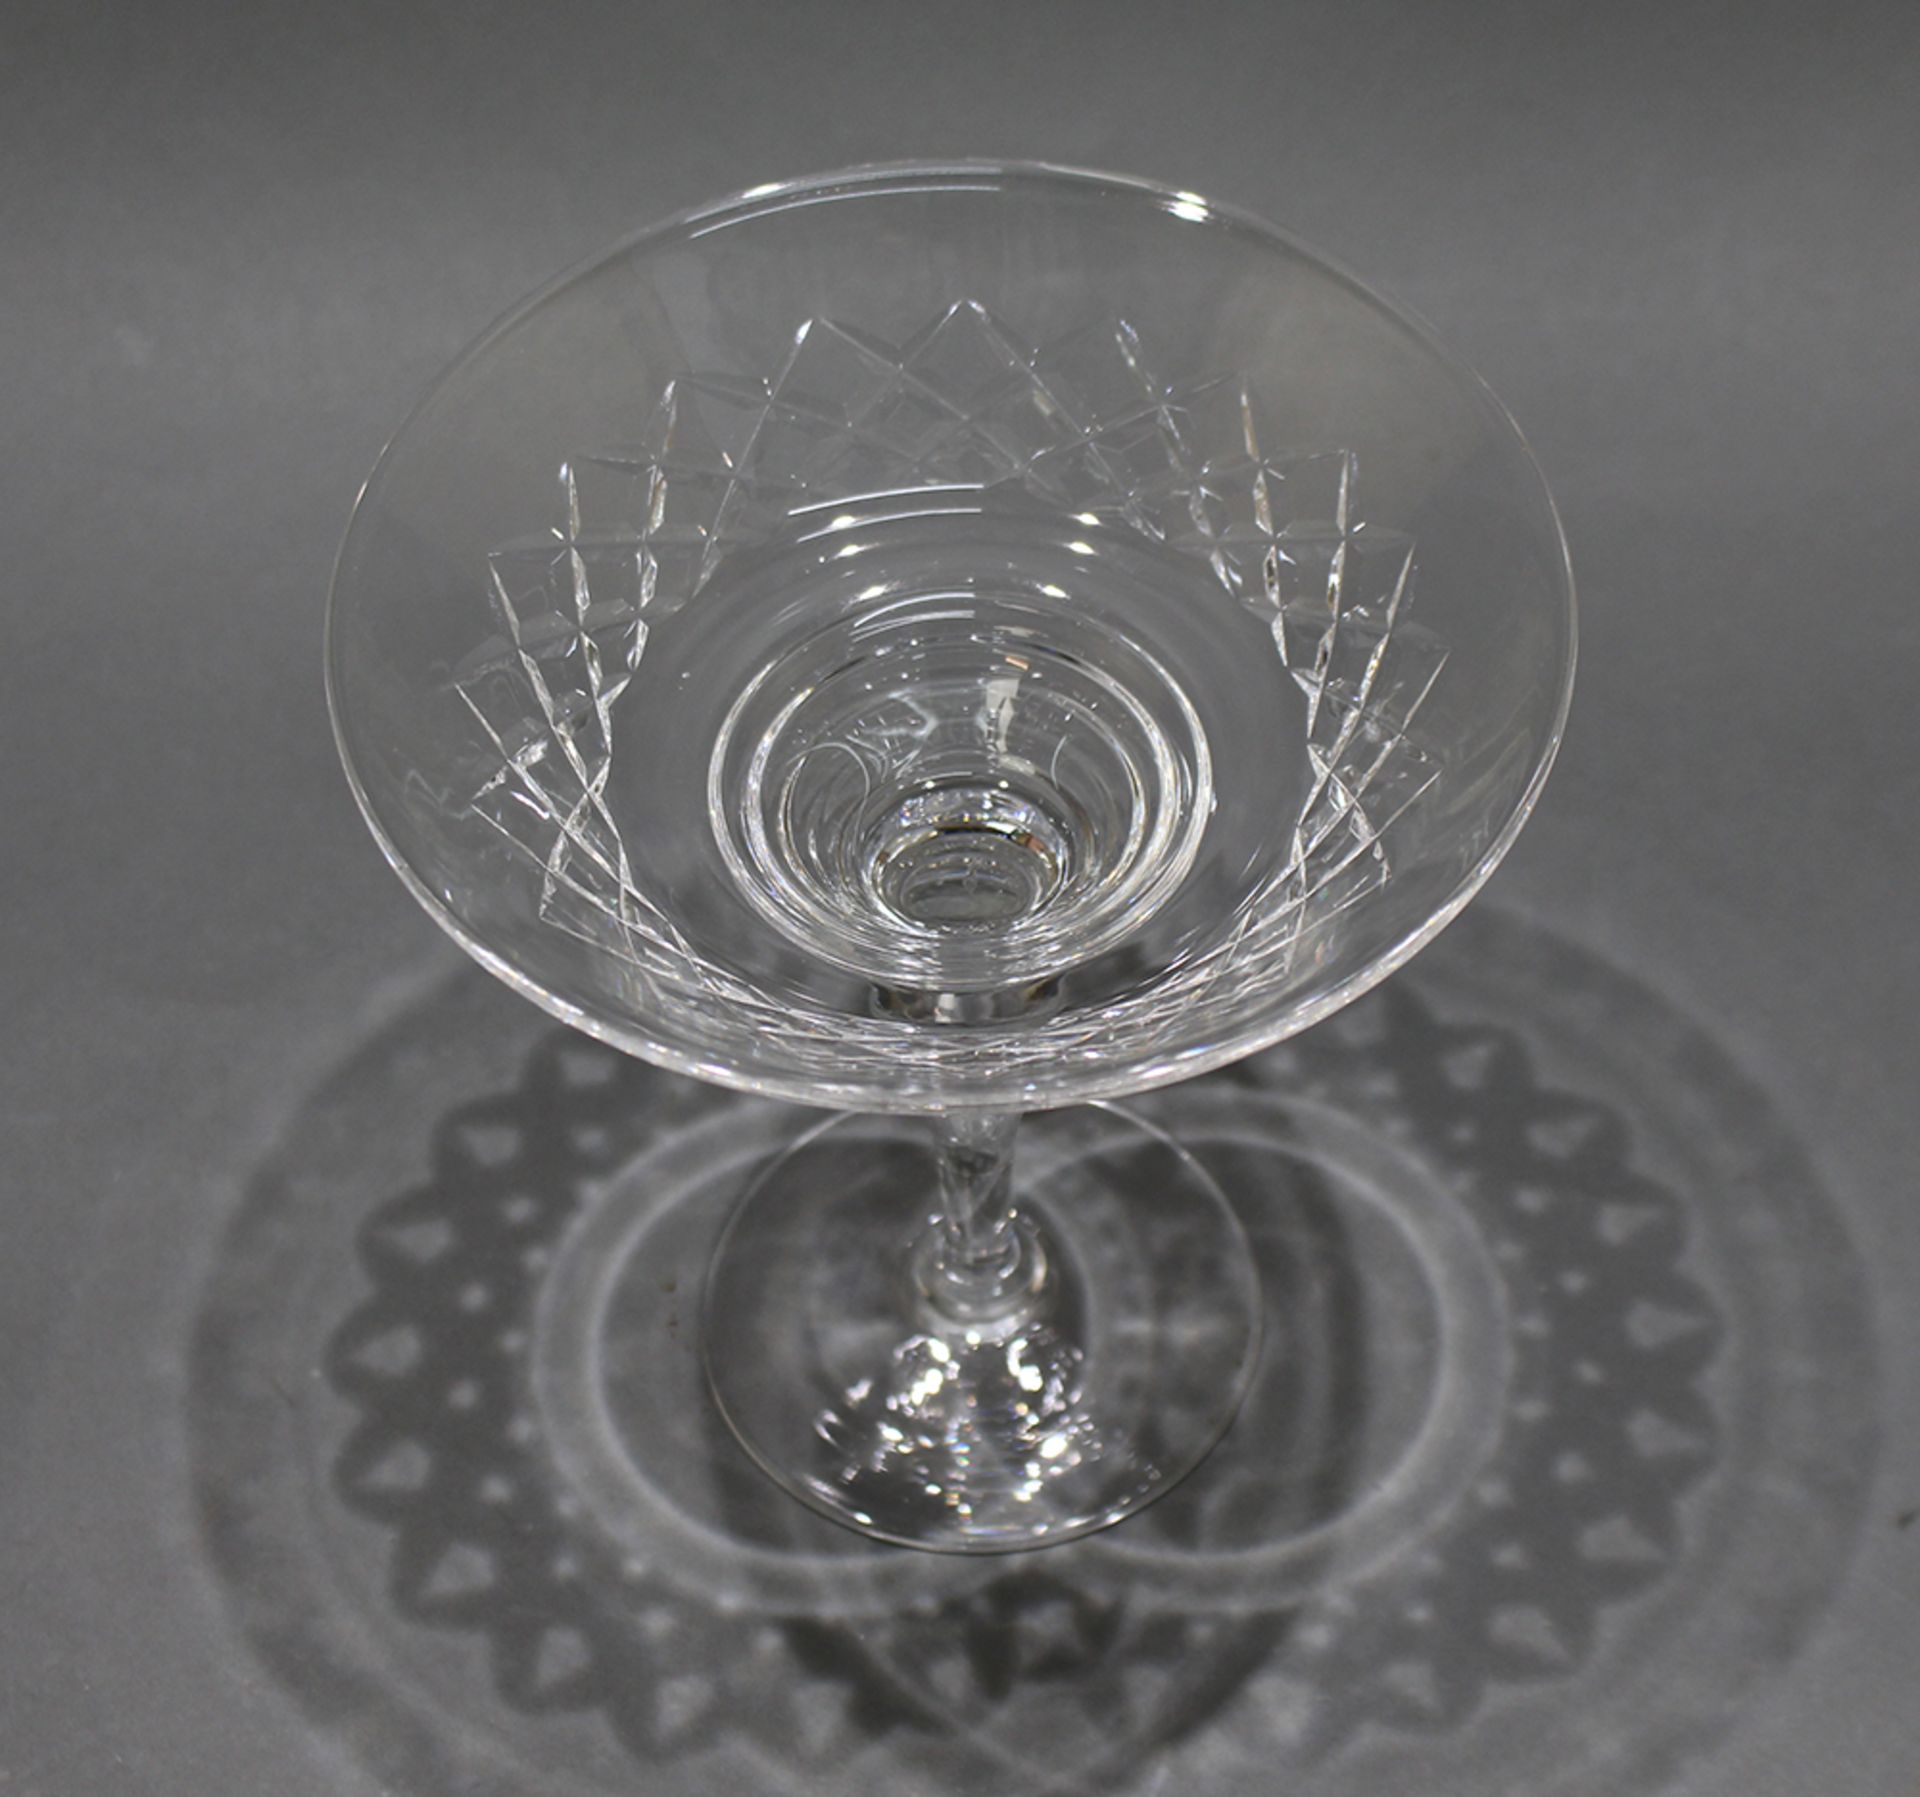 Vintage Cut Glass Crystal Tazza - Image 2 of 3